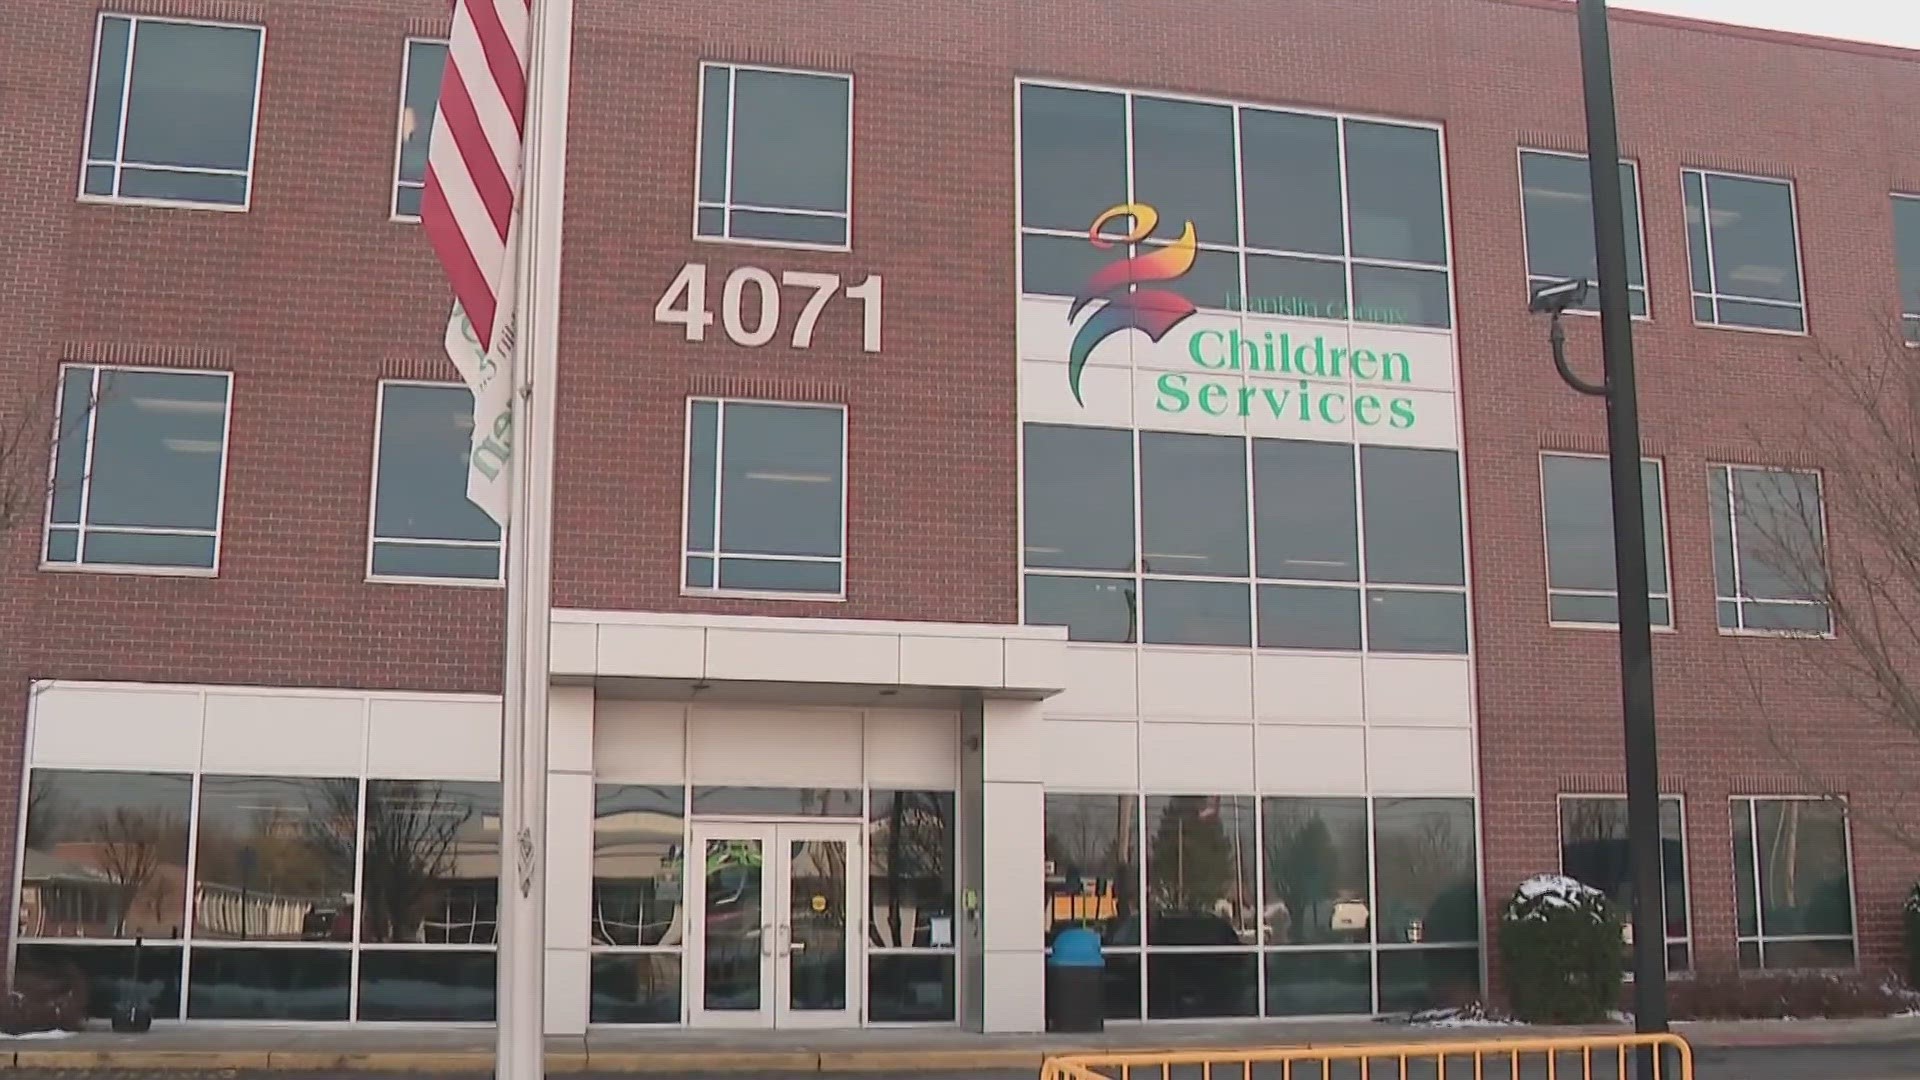 Since 2020, 162 foster children have slept in the office of Franklin County Children Services.